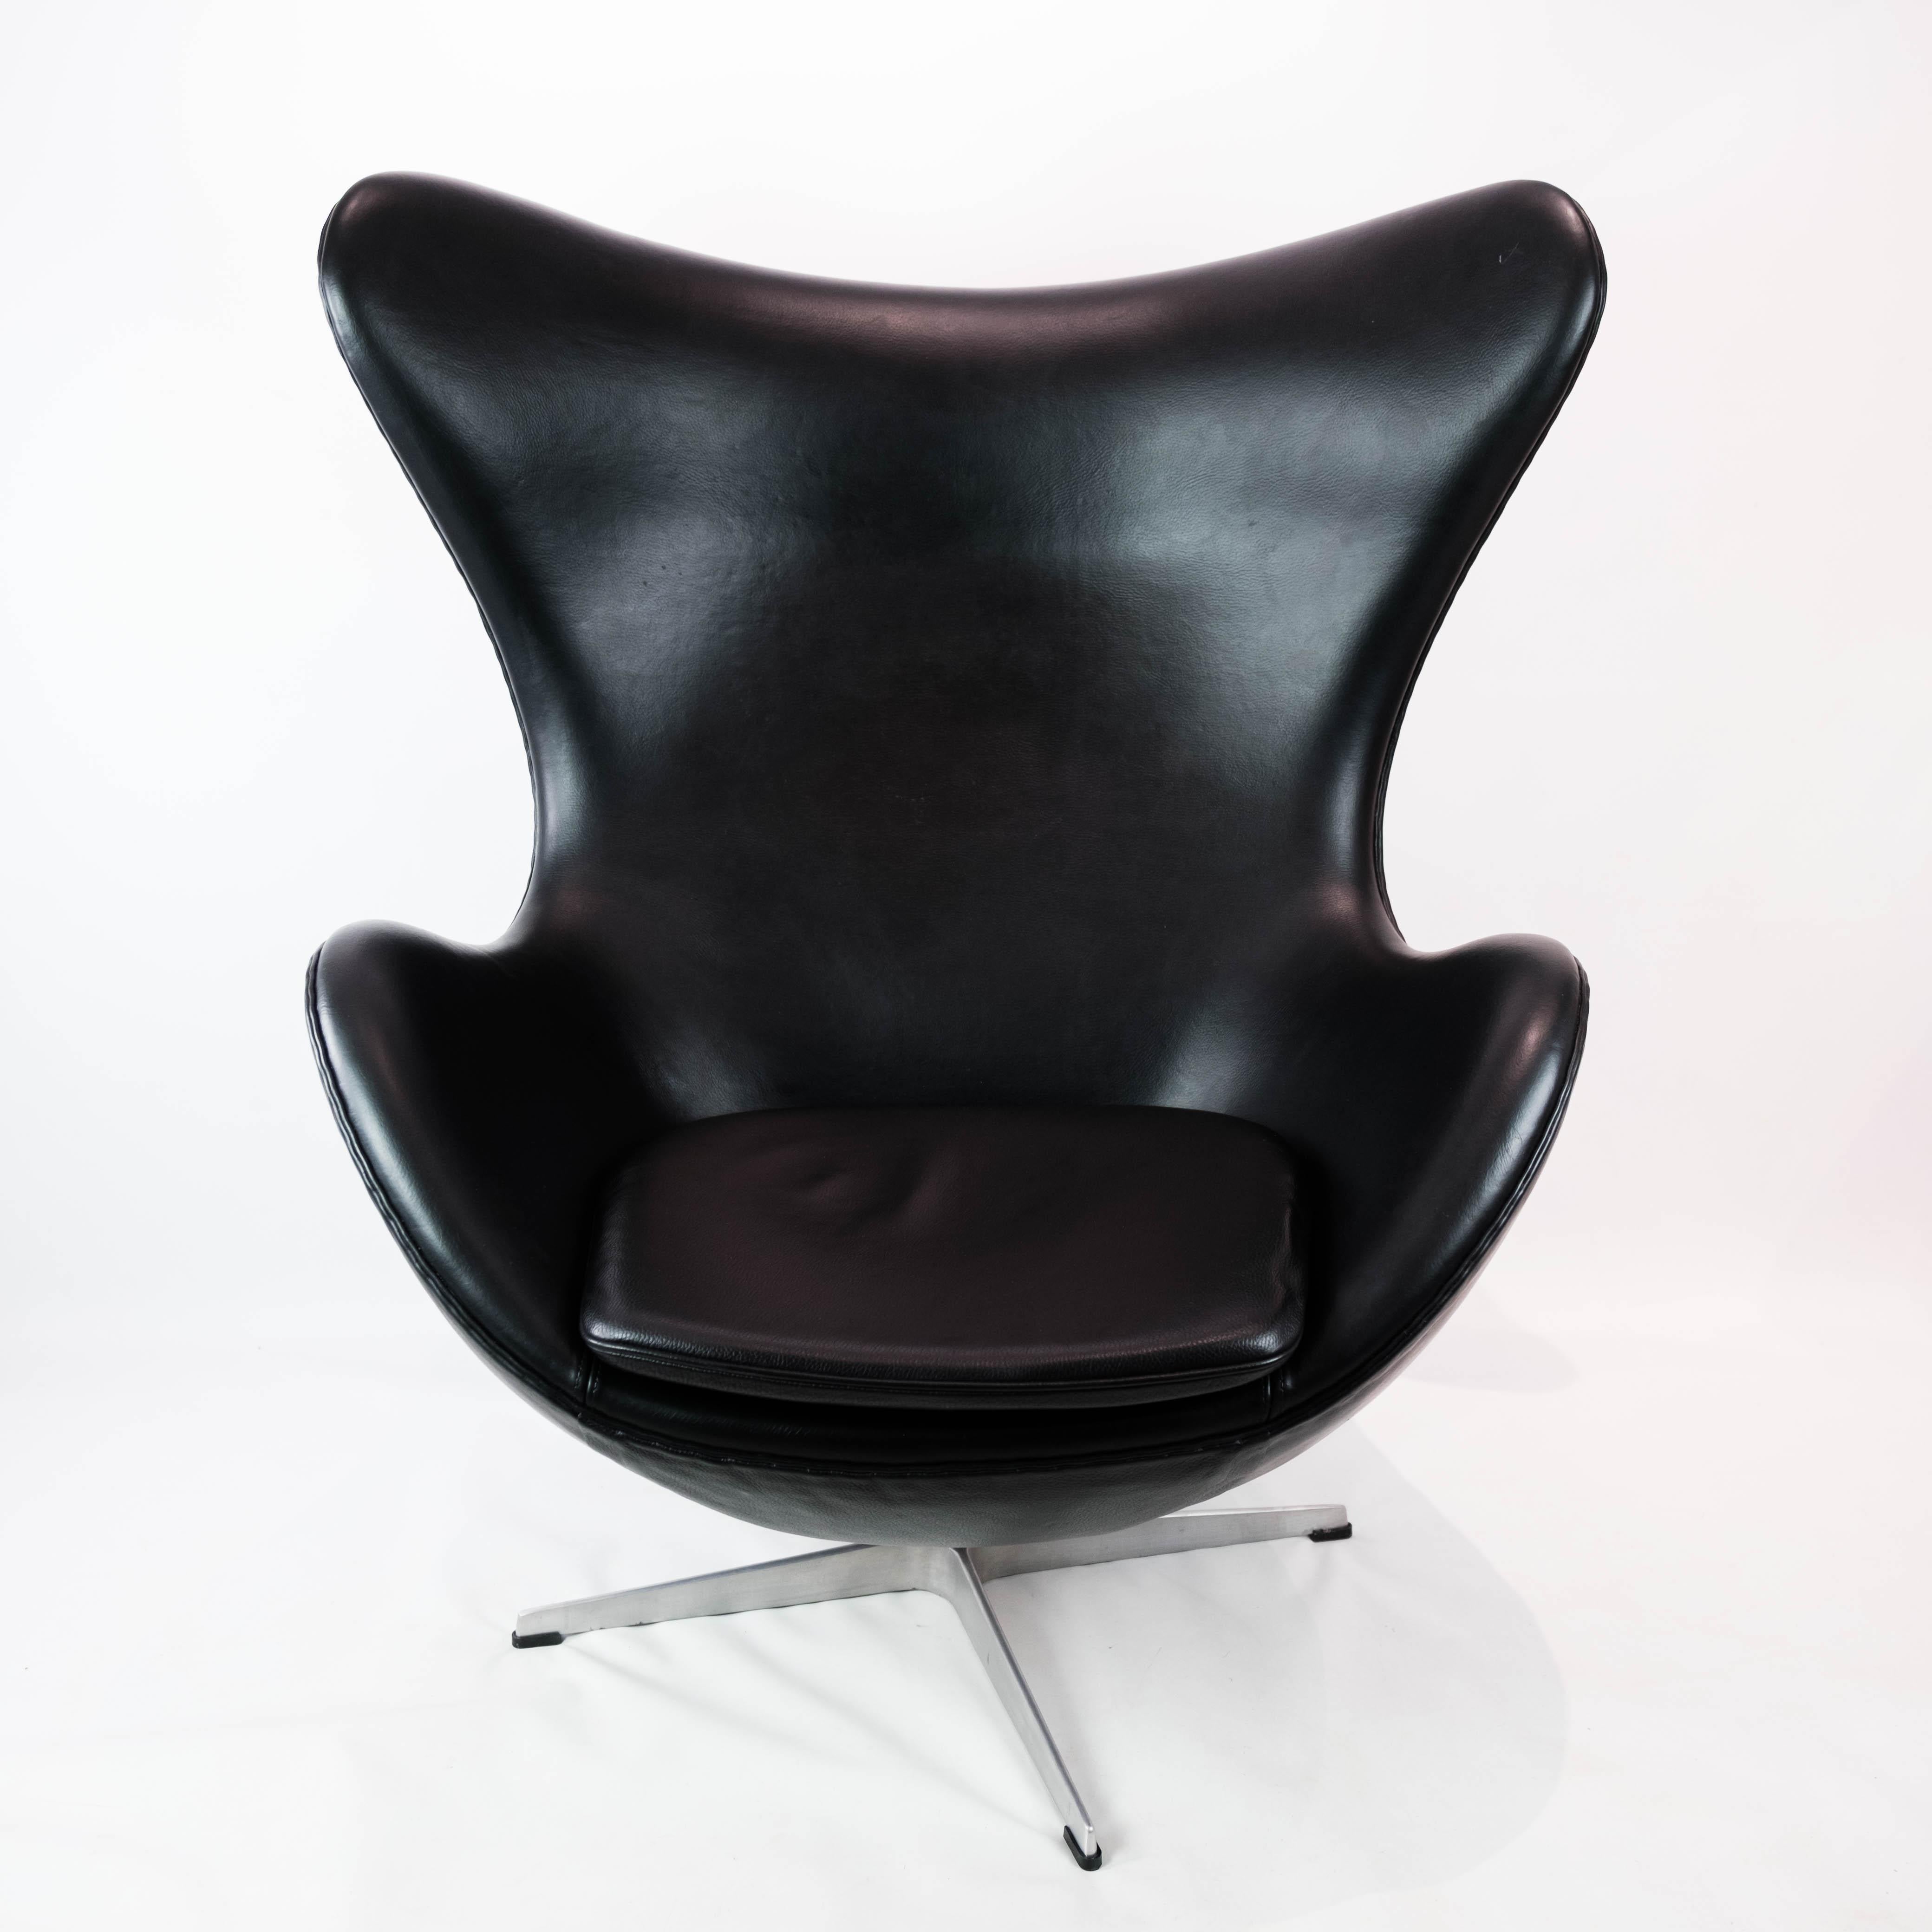 The Egg, model 3316, designed by Arne Jacobsen in 1958 and manufactured by Fritz Hansen in 2001, is an iconic piece of mid-century modern design. This chair, with its distinctive curved shape and sculptural silhouette, epitomizes Jacobsen's